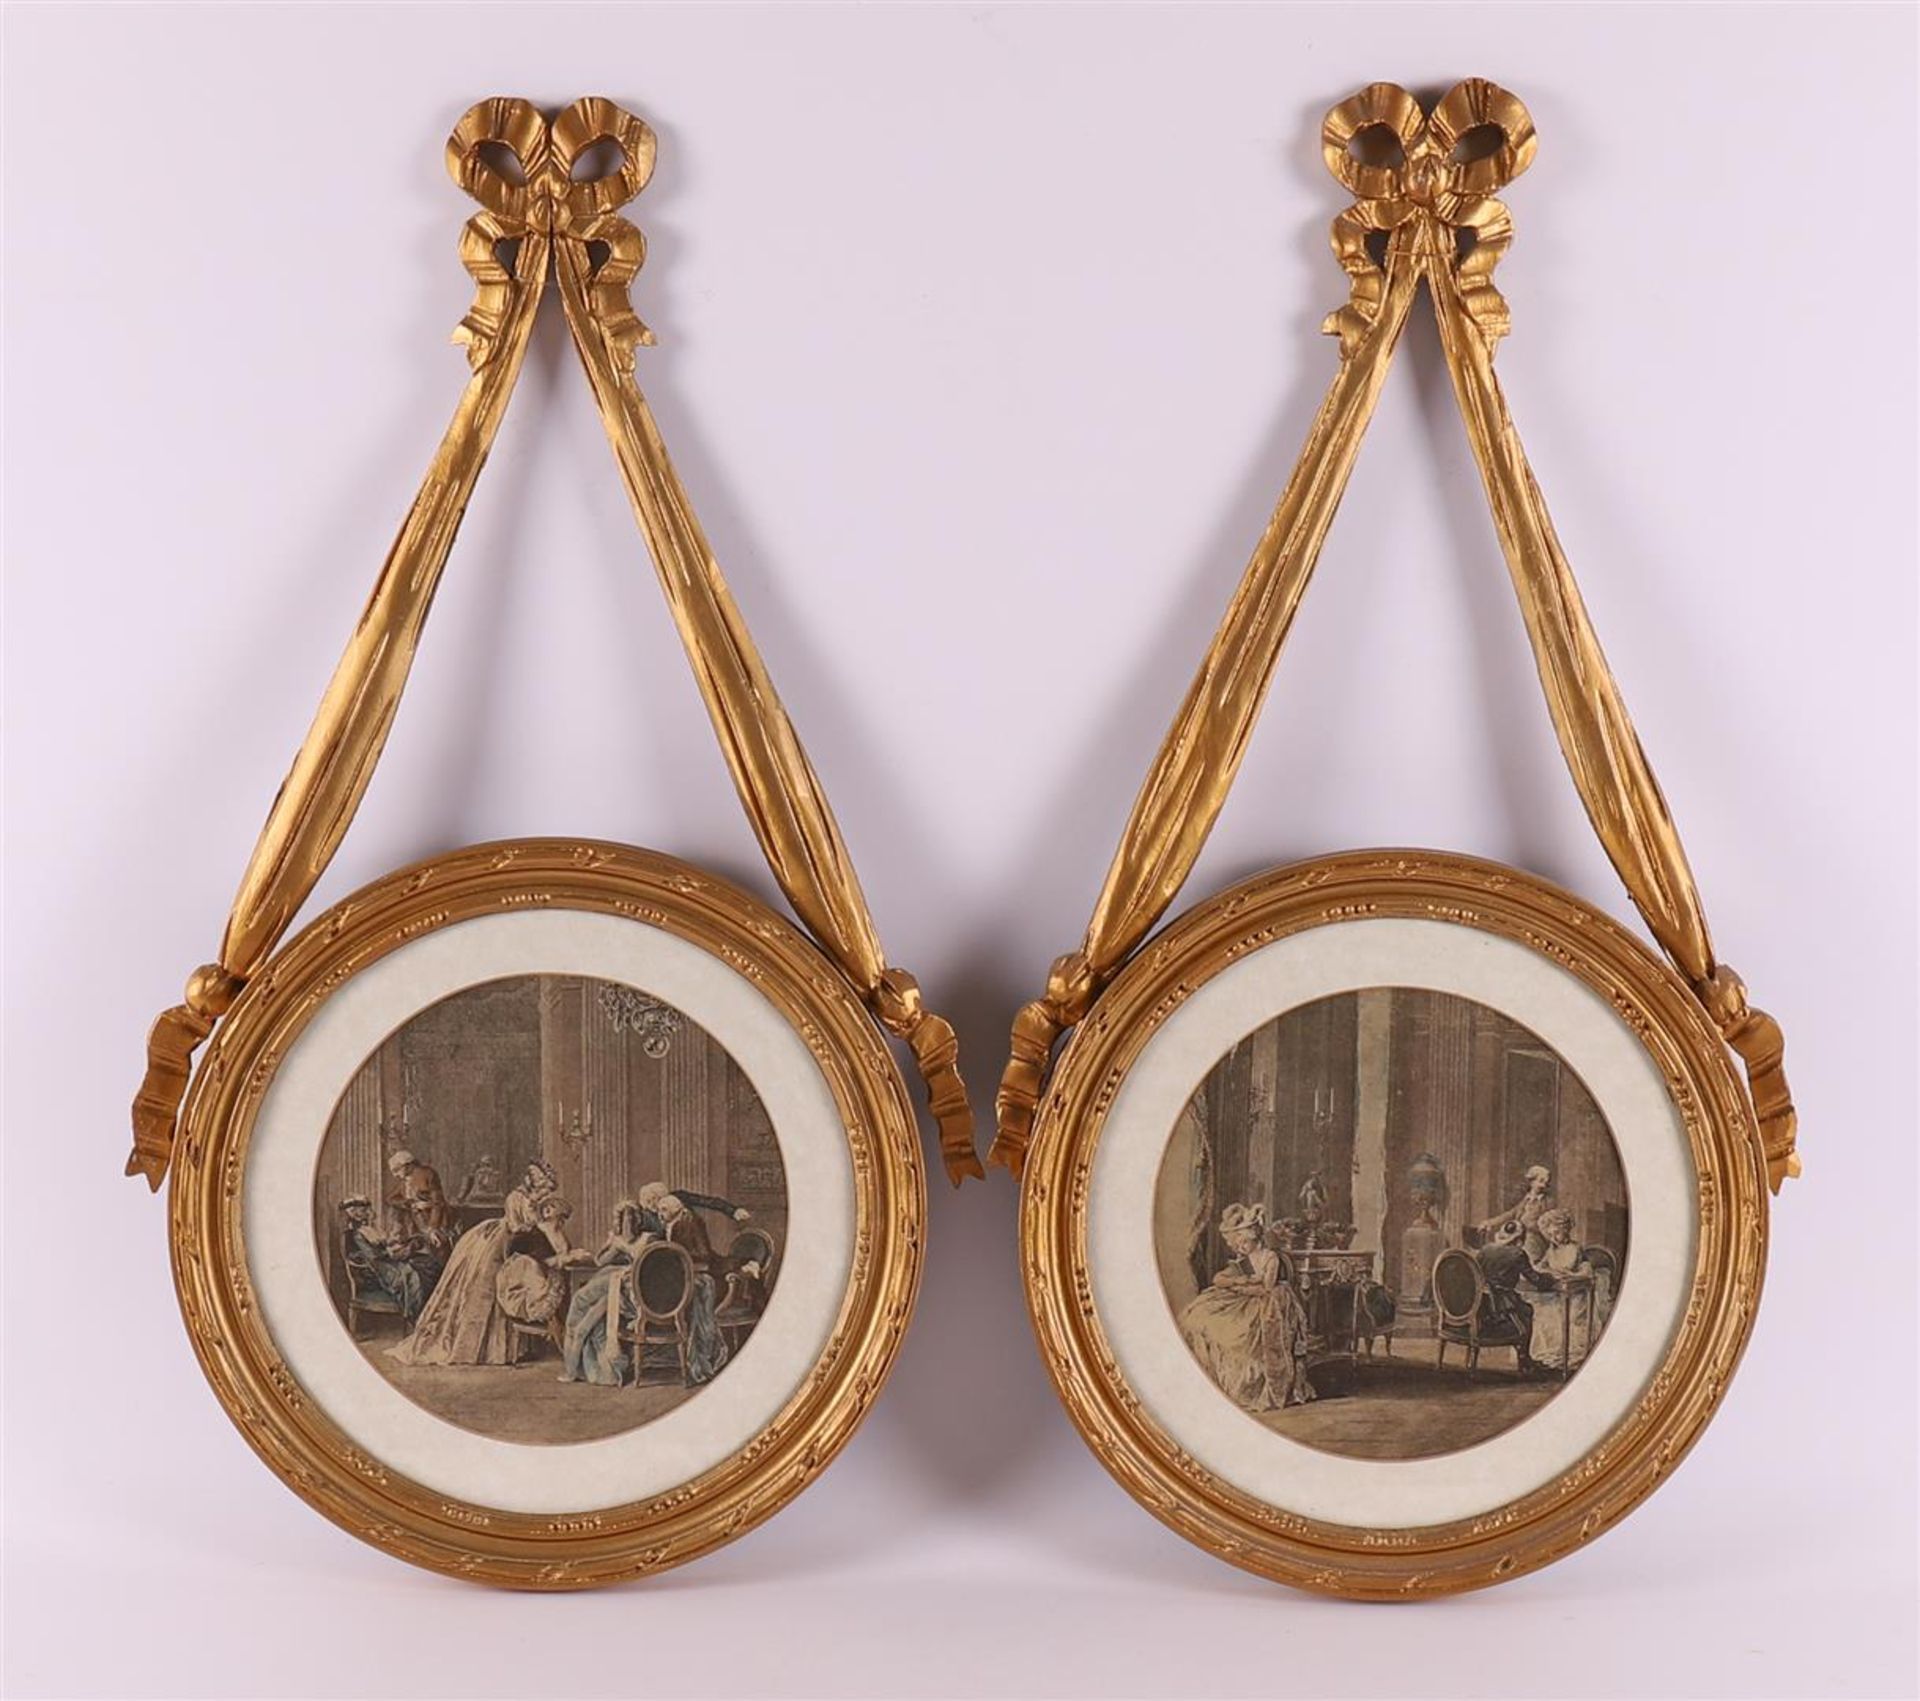 A set of round gilt wooden frames with bow ornament, 19th century.